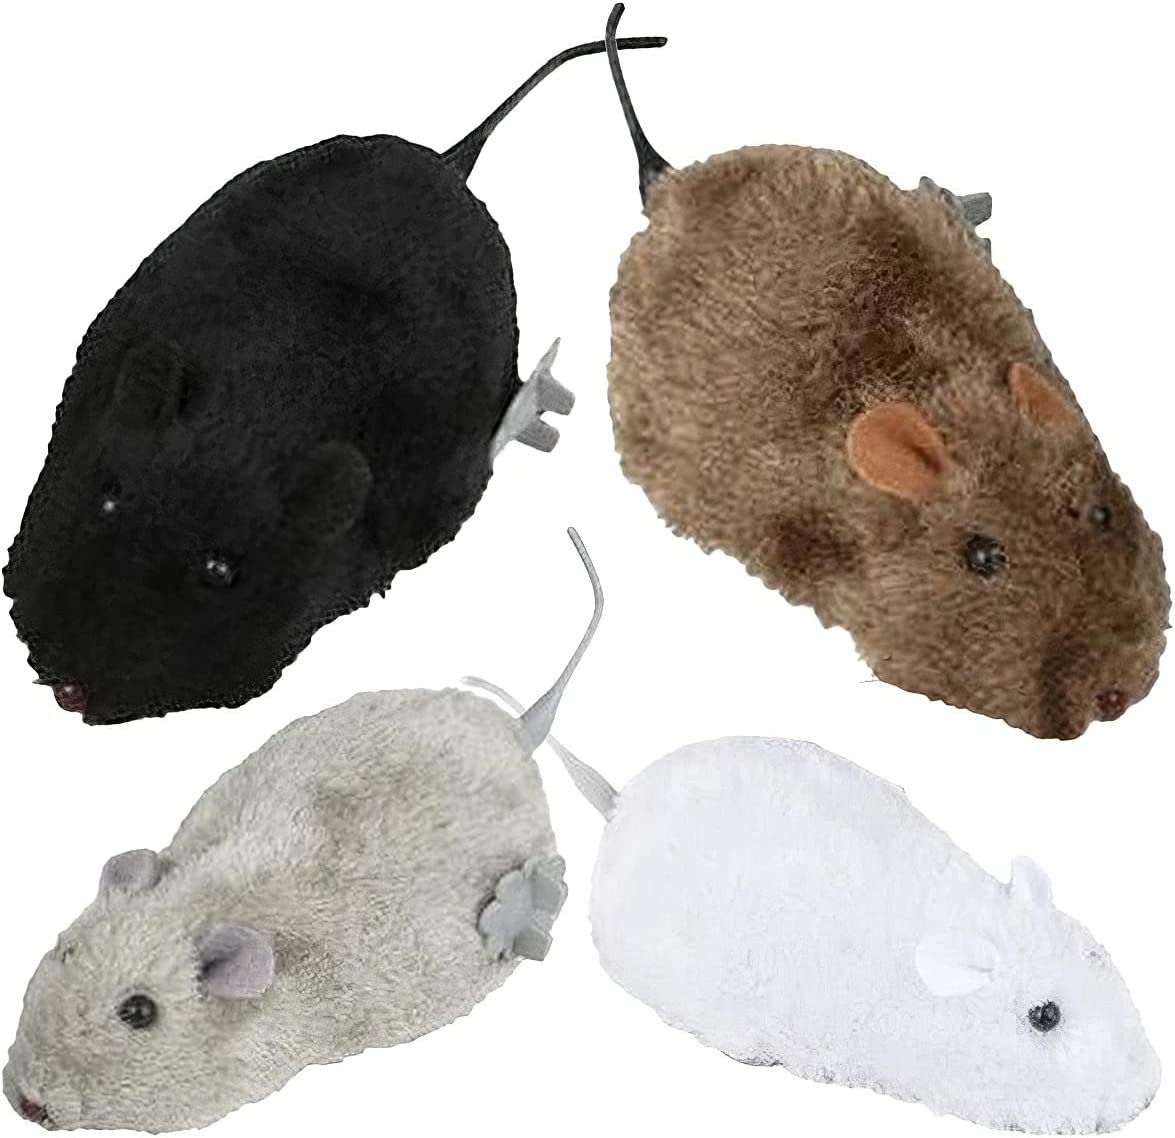 Wind Up Mouse Toys, Set of 4, Classic Prank Toys for Kids in 4 Colors, Animal Party Favors for Children, No Batteries Needed, Goody Bag Fillers for Boys and Girls